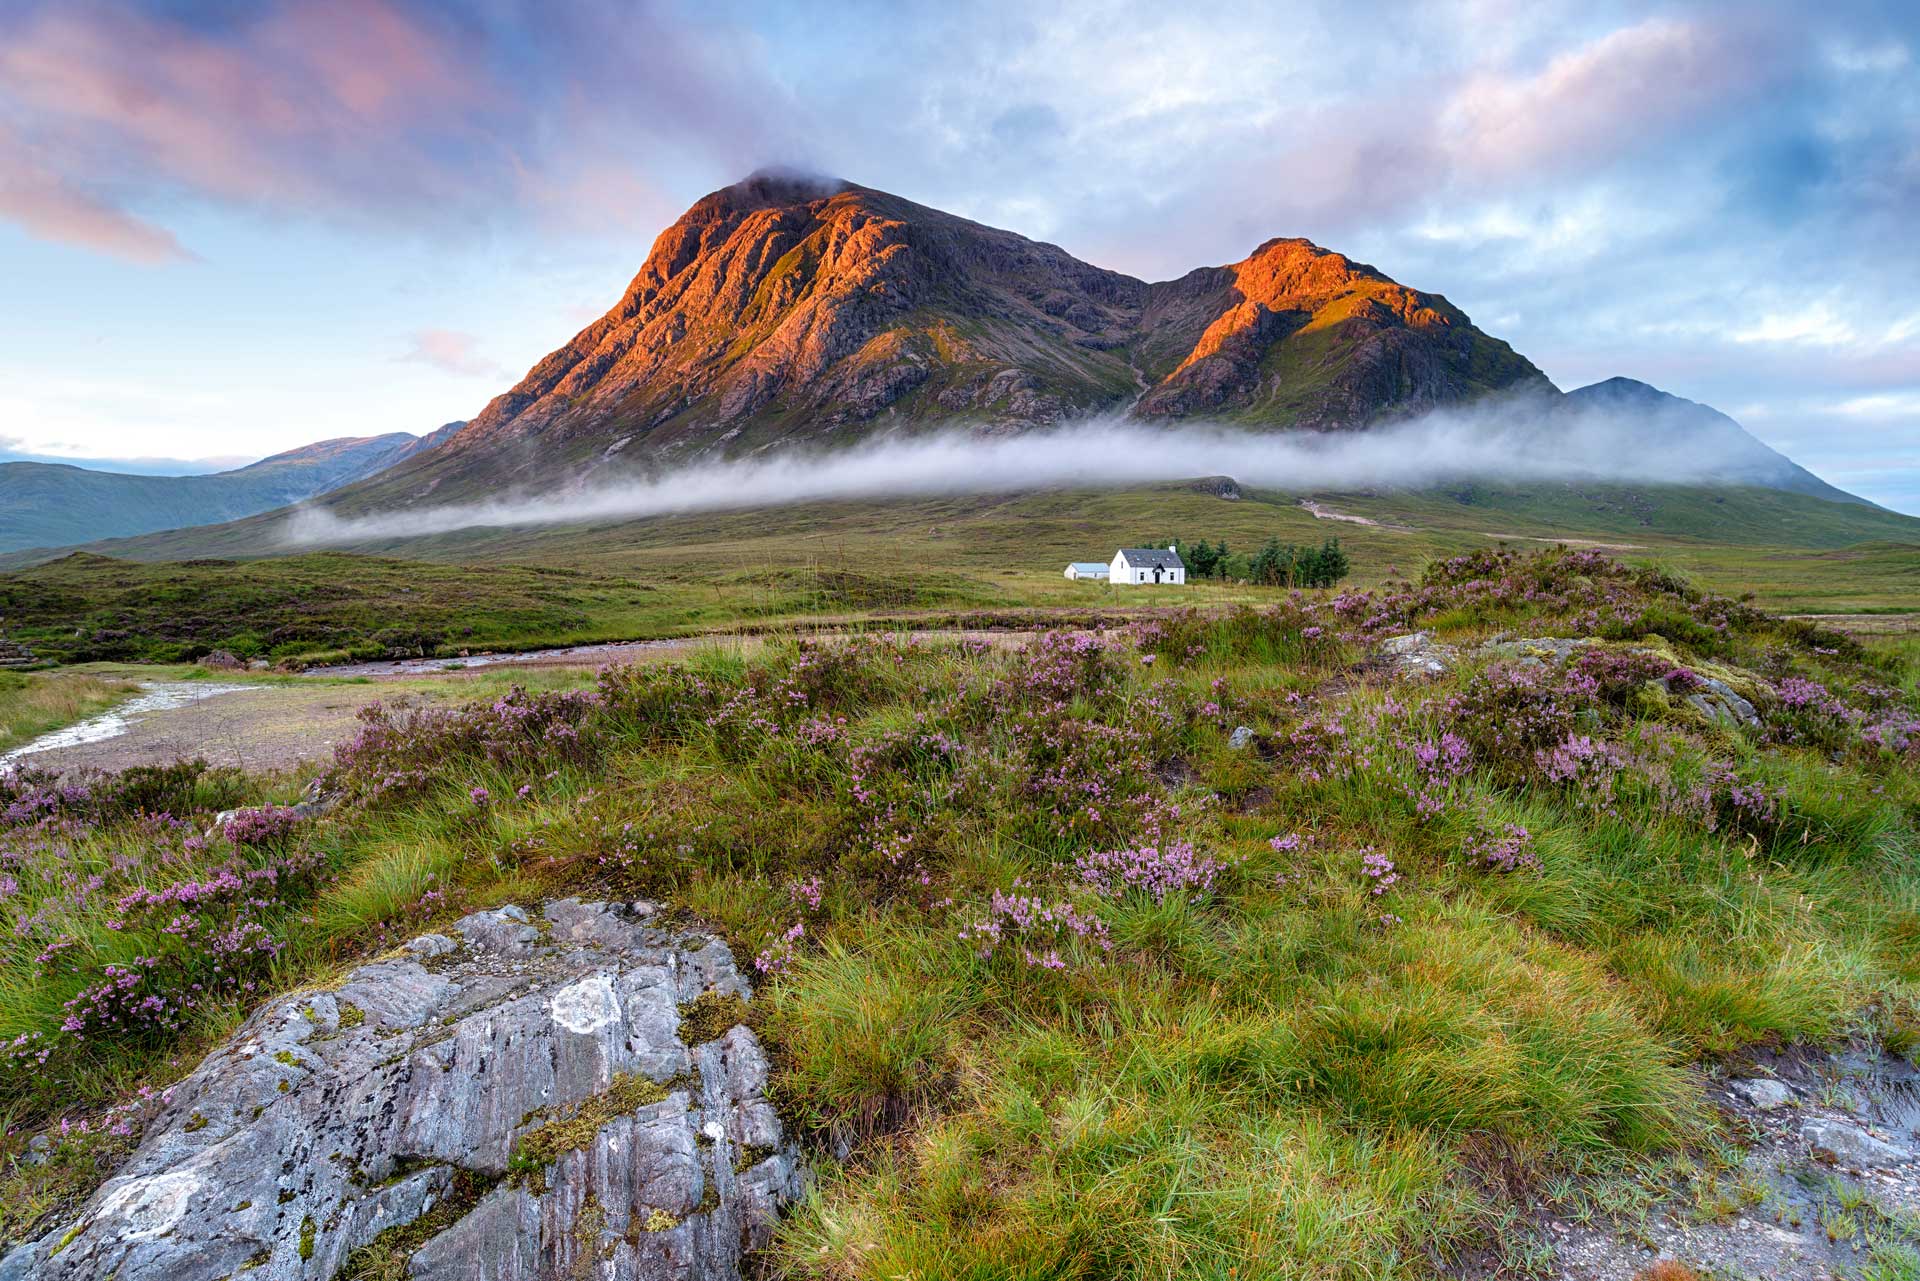 Sunrise in Glencoe, why not join a photography course with Glencoe Photography and brush up on your camera skills